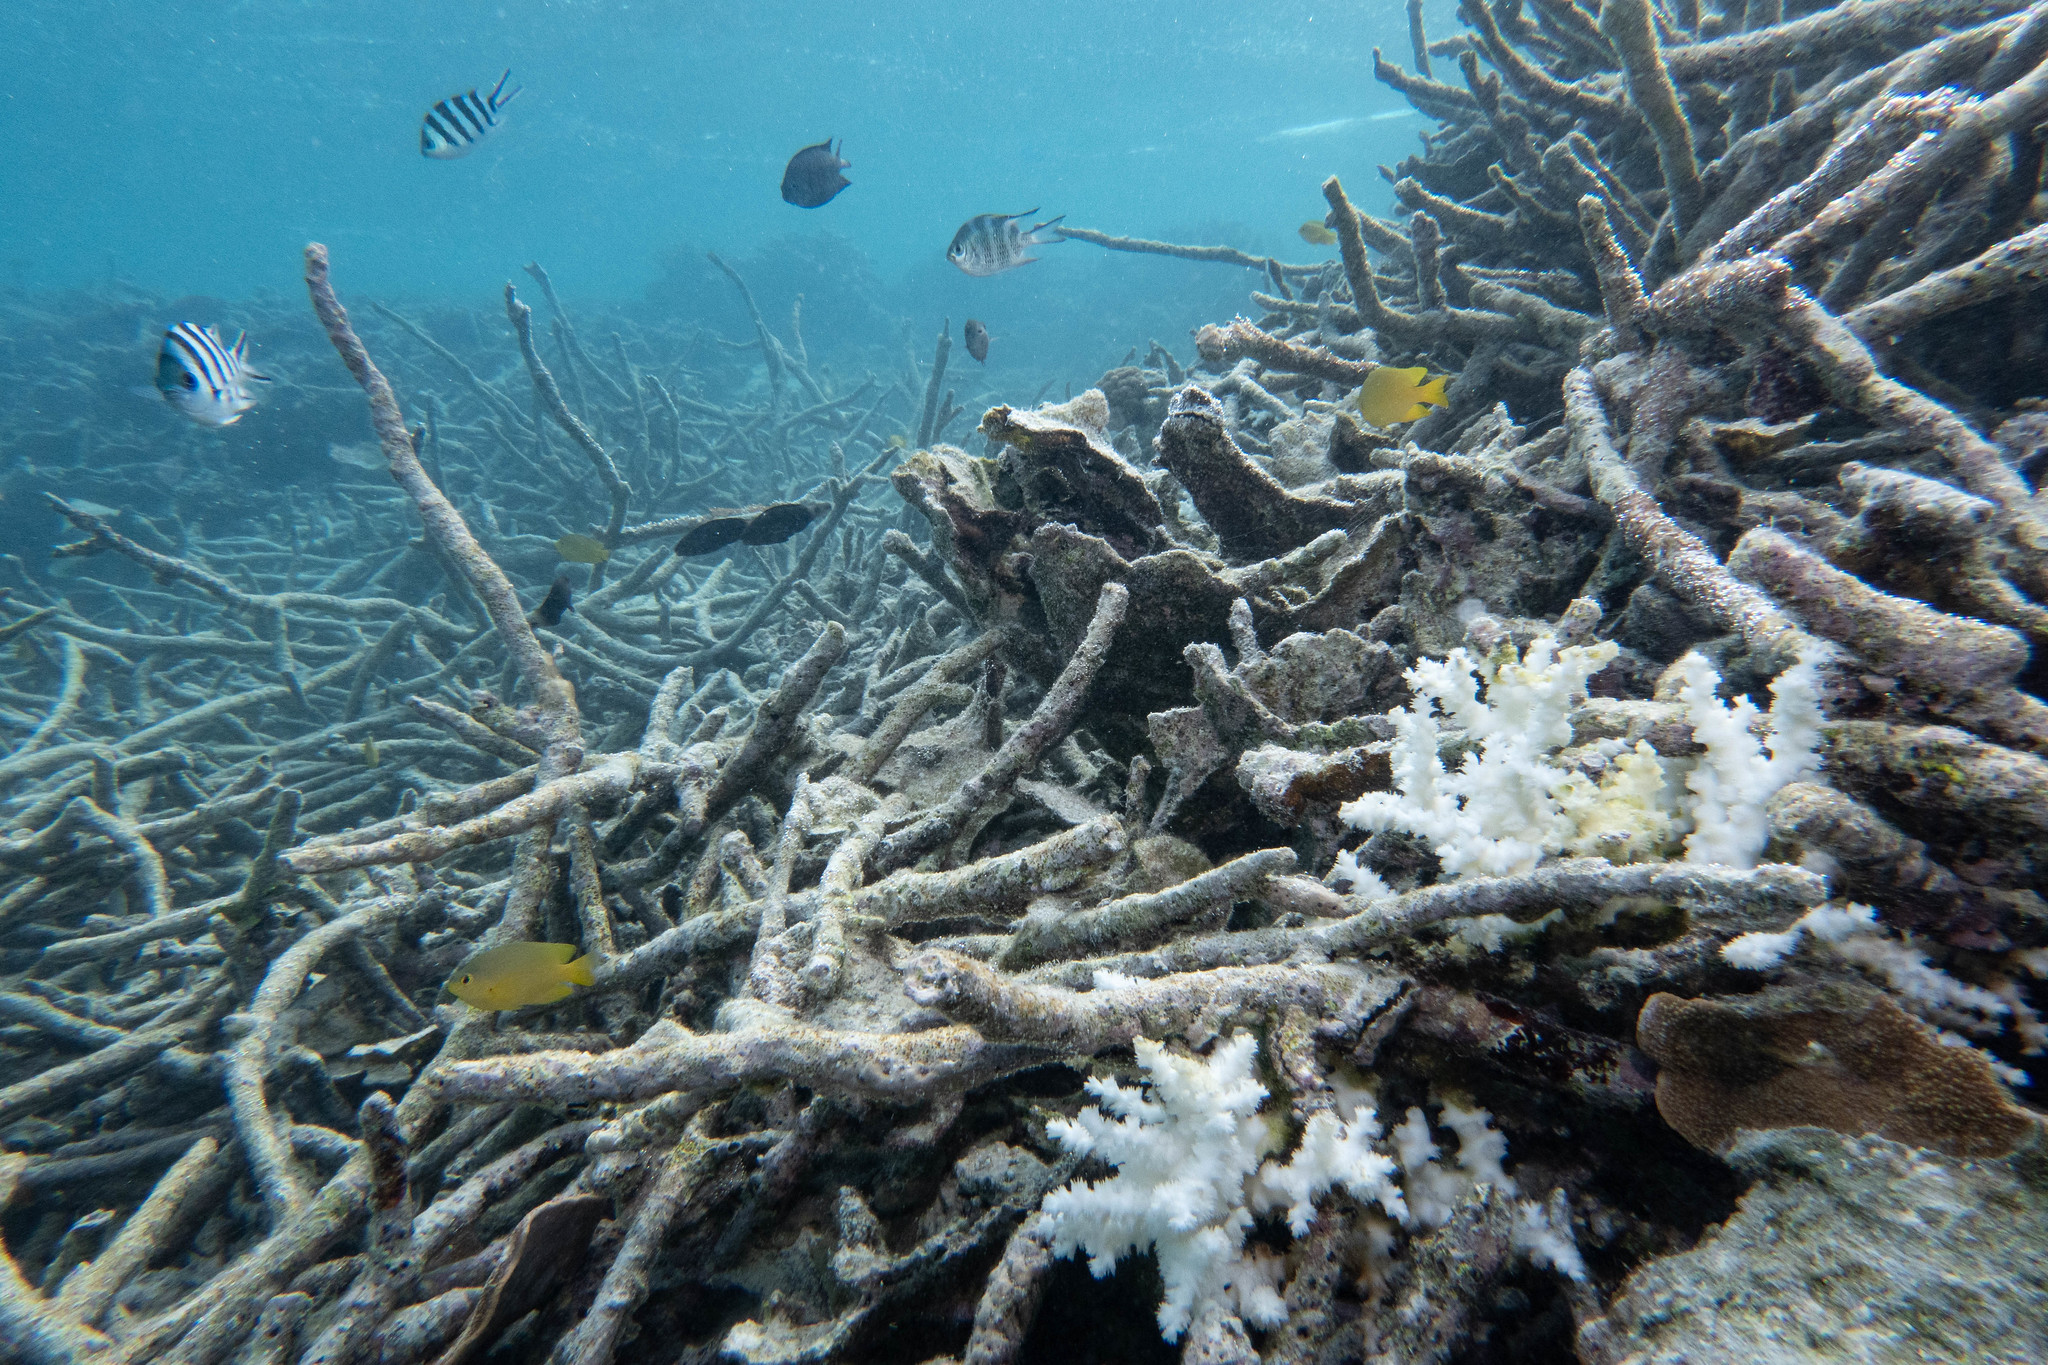 One Tree Island, Great Barrier Reef: the majority of corals have died and among the few survivors, many are now bleached. In the foreground are two small bleached Galaxea colonies and an unbleached Montipora - May 1, 2024 (by John Turnbull CC BY-NC-SA 2.0 DEED via Flickr).